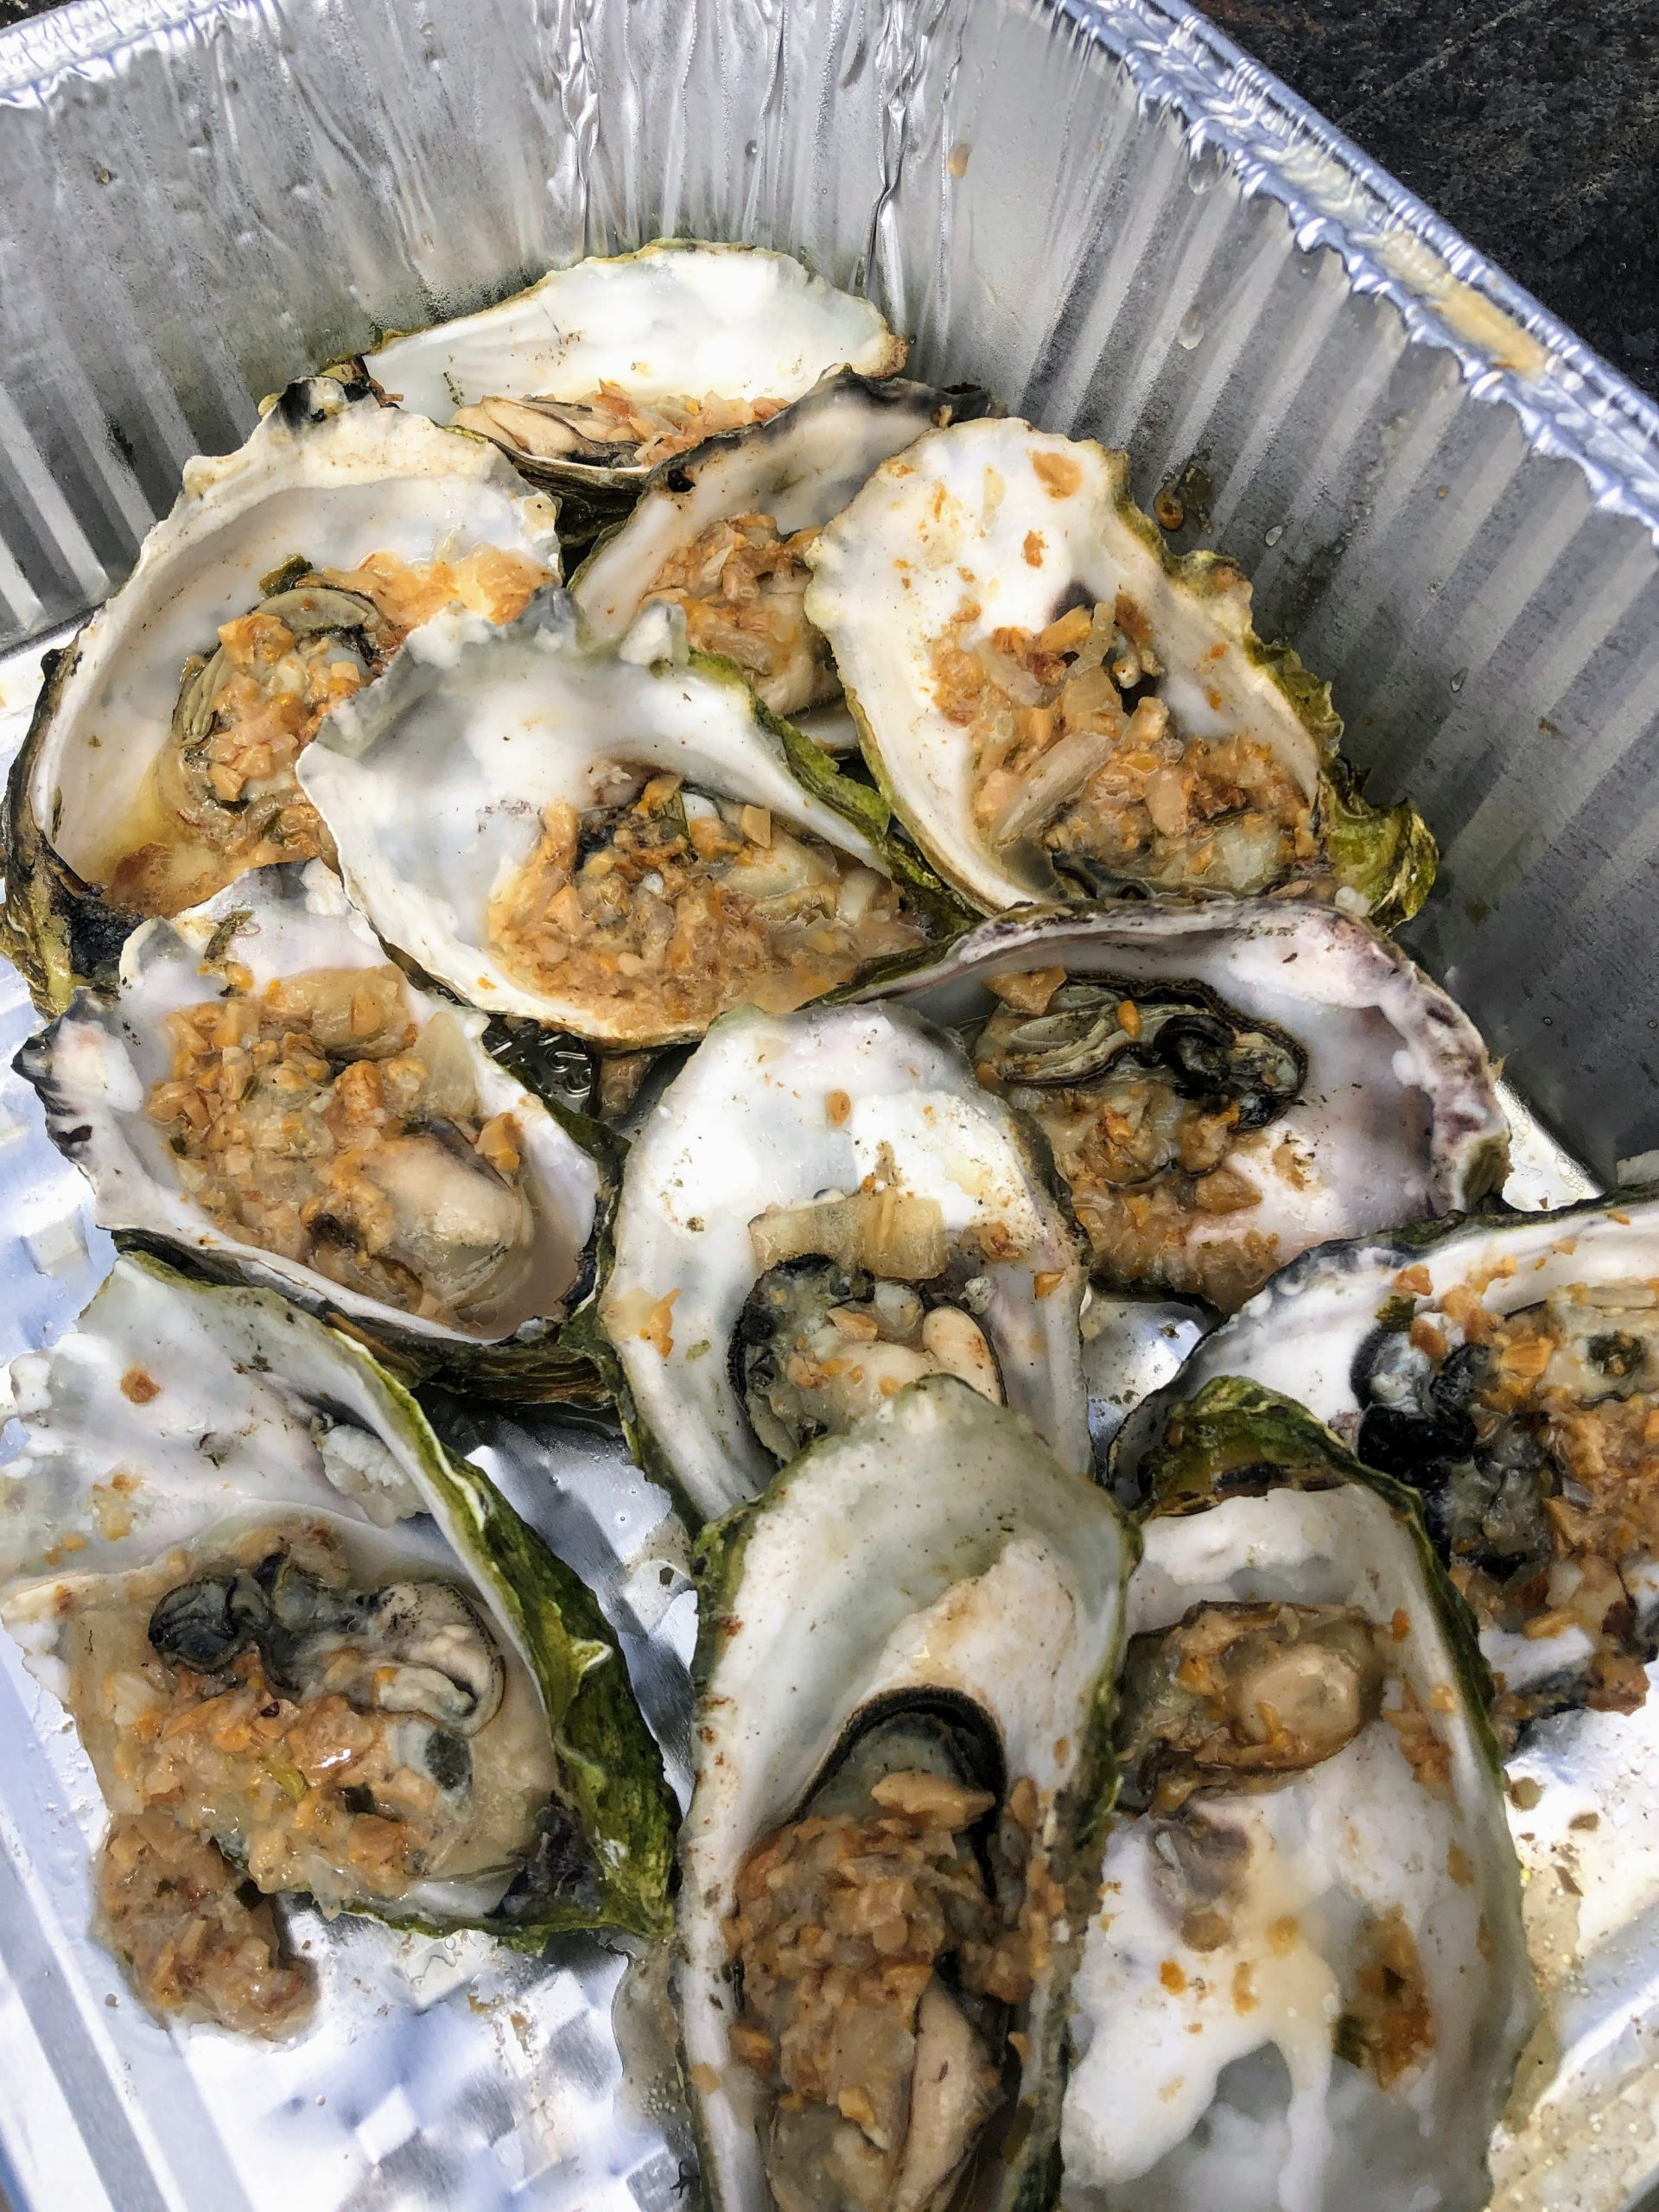 One dozen BBQ oysters from the Casino Bar & Grill in Bodega, CA.